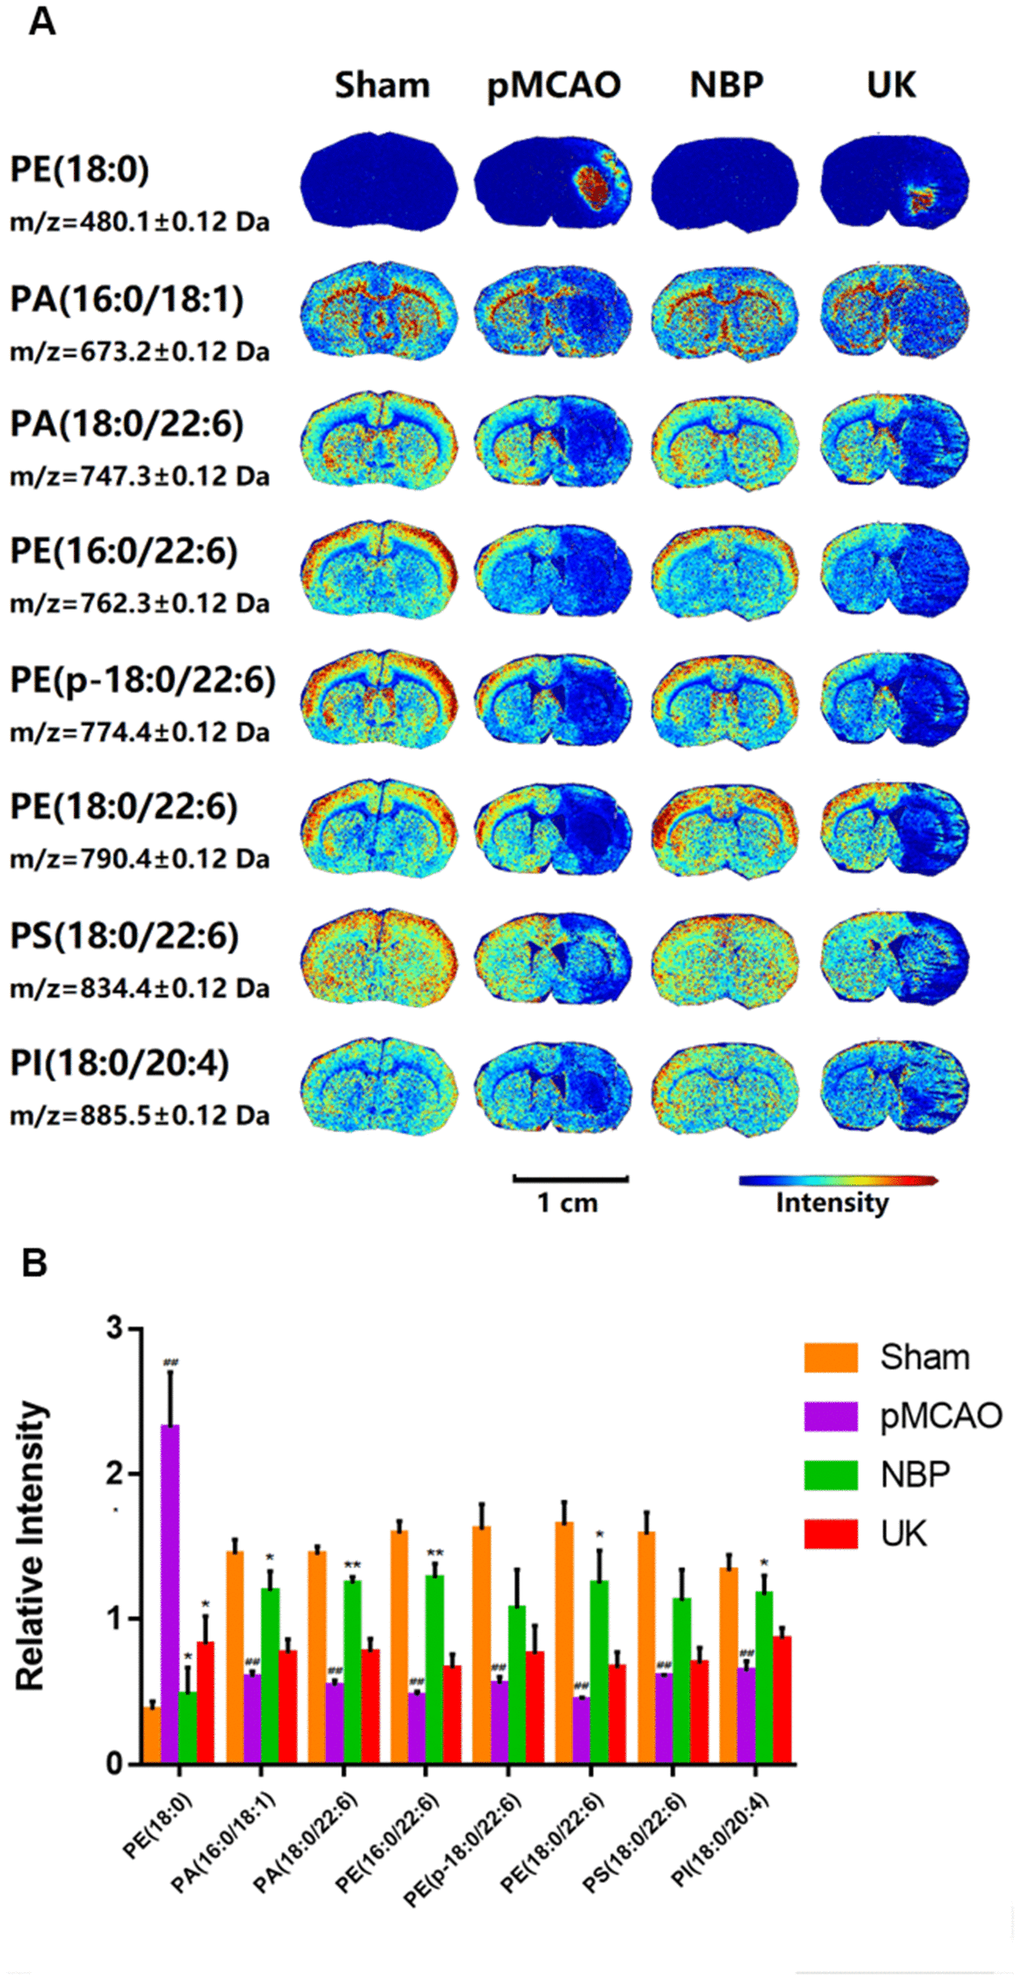 Changes in phospholipid levels in the brains of rats with pMCAO. (A) In situ MALDI-TOF MSI of phosphatidylethanolamine (PE) (18:0), phosphatidic acid (PA) (16:0/18:1), PA (18:0/22:6), PE (16:0/22:6), PE (p-18:0/22:6), PE (18:0/22:6), phosphatidylserine (PS) (18:0/22:6) and phosphatidylinositol (PI) (18:0/20:4). The spatial resolution was set to 100 μm. Scale bar = 1 cm. (B) Statistical analysis of the relative intensities of the phospholipids mentioned above. Values were normalized to those in the left brain where there was no ischemia. The data are presented as the mean ± SD, n = 3, and were assessed using one-way ANOVA. ## P P P 